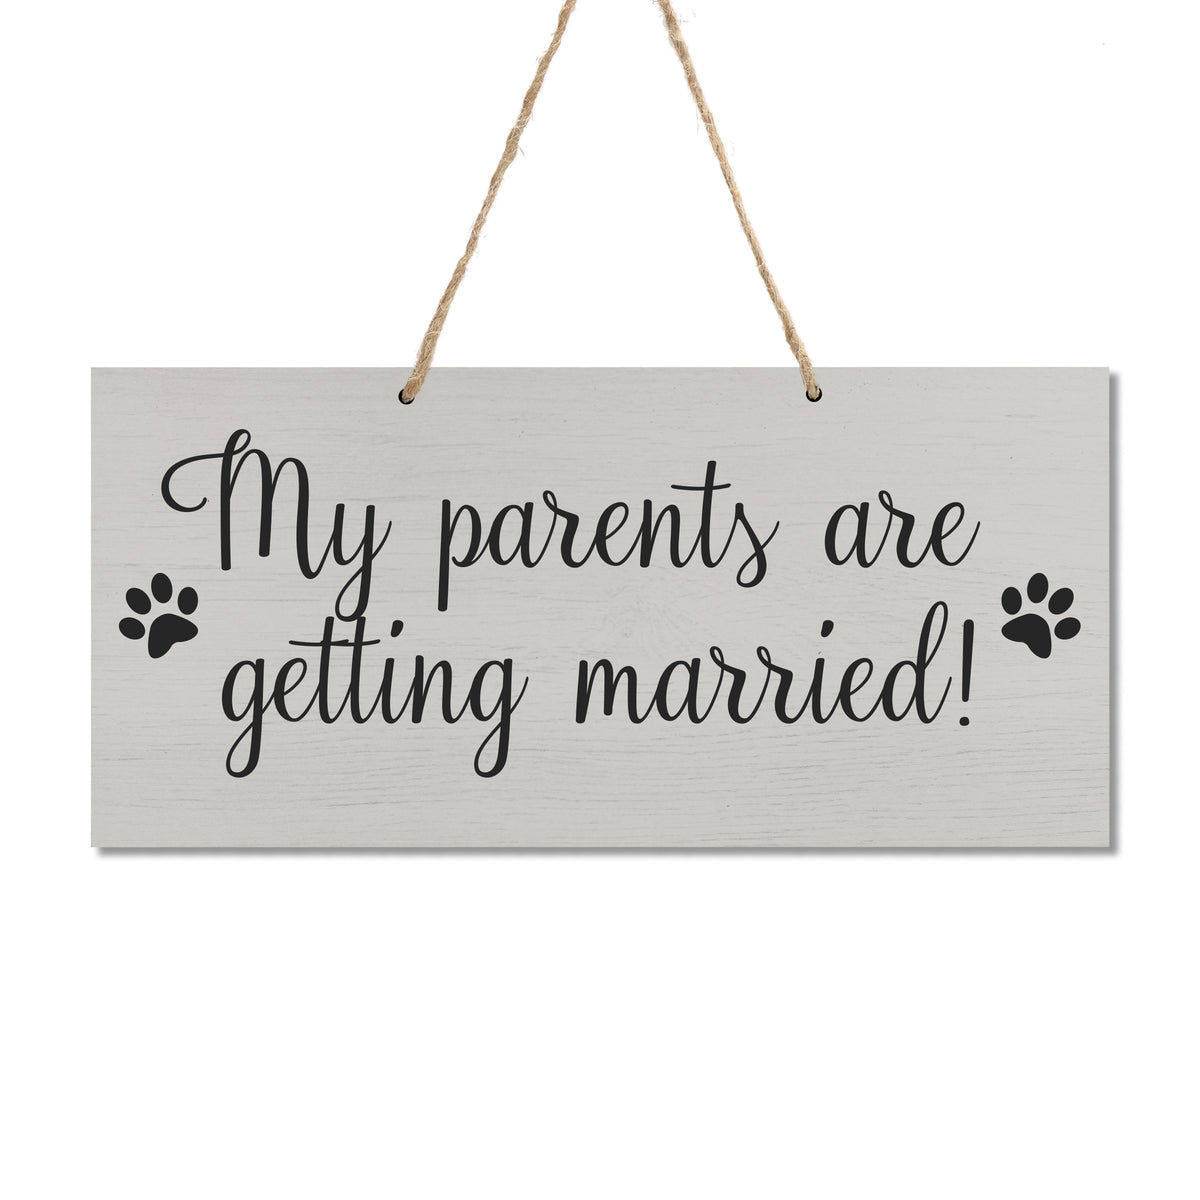 LifeSong Milestones Dog Wedding Sign Anniversary Engagement Decor Rope Signs for Reception and Ceremony for Bride and Groom Decorations 5.5x12